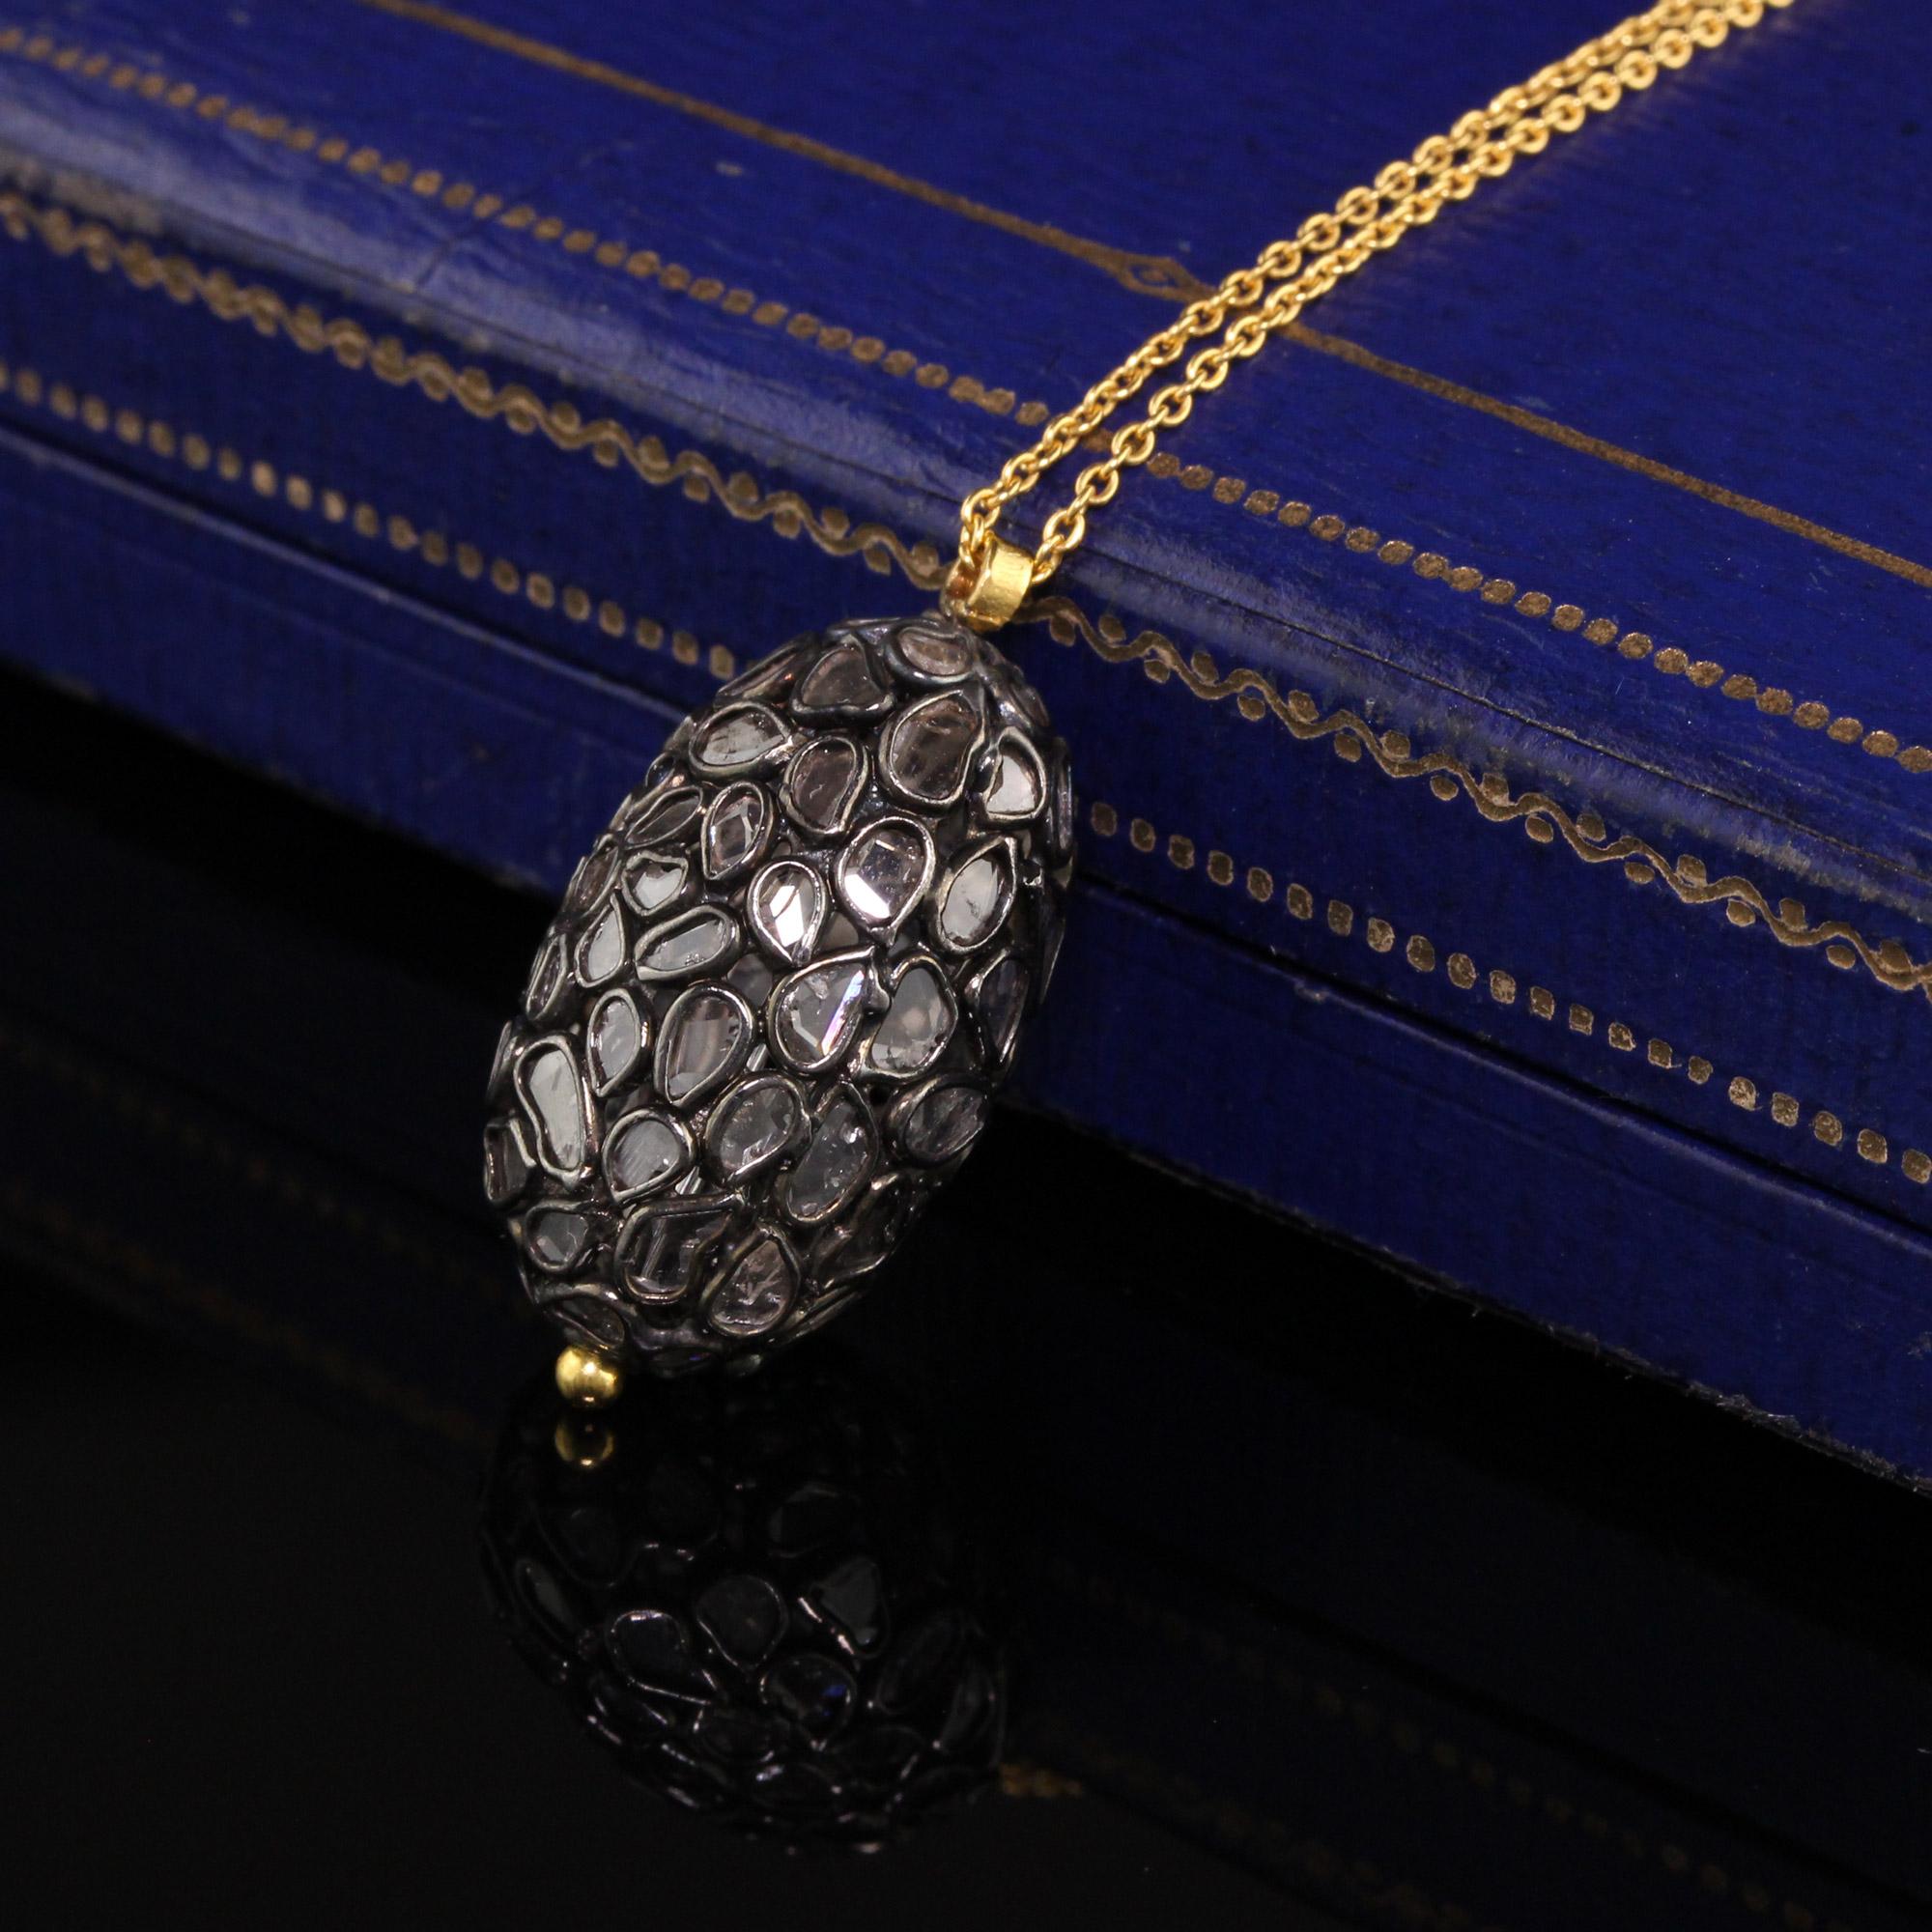 Gorgeous Gurhan 18K Yellow Gold and Silver Rose Cut Diamond Oval Globe Pendant. This pendant has rose cut slices going around the entire pendant. The pendant also spins and comes with its original 18 inch chain.

Item #N0057

Metal: 18K Yellow Gold